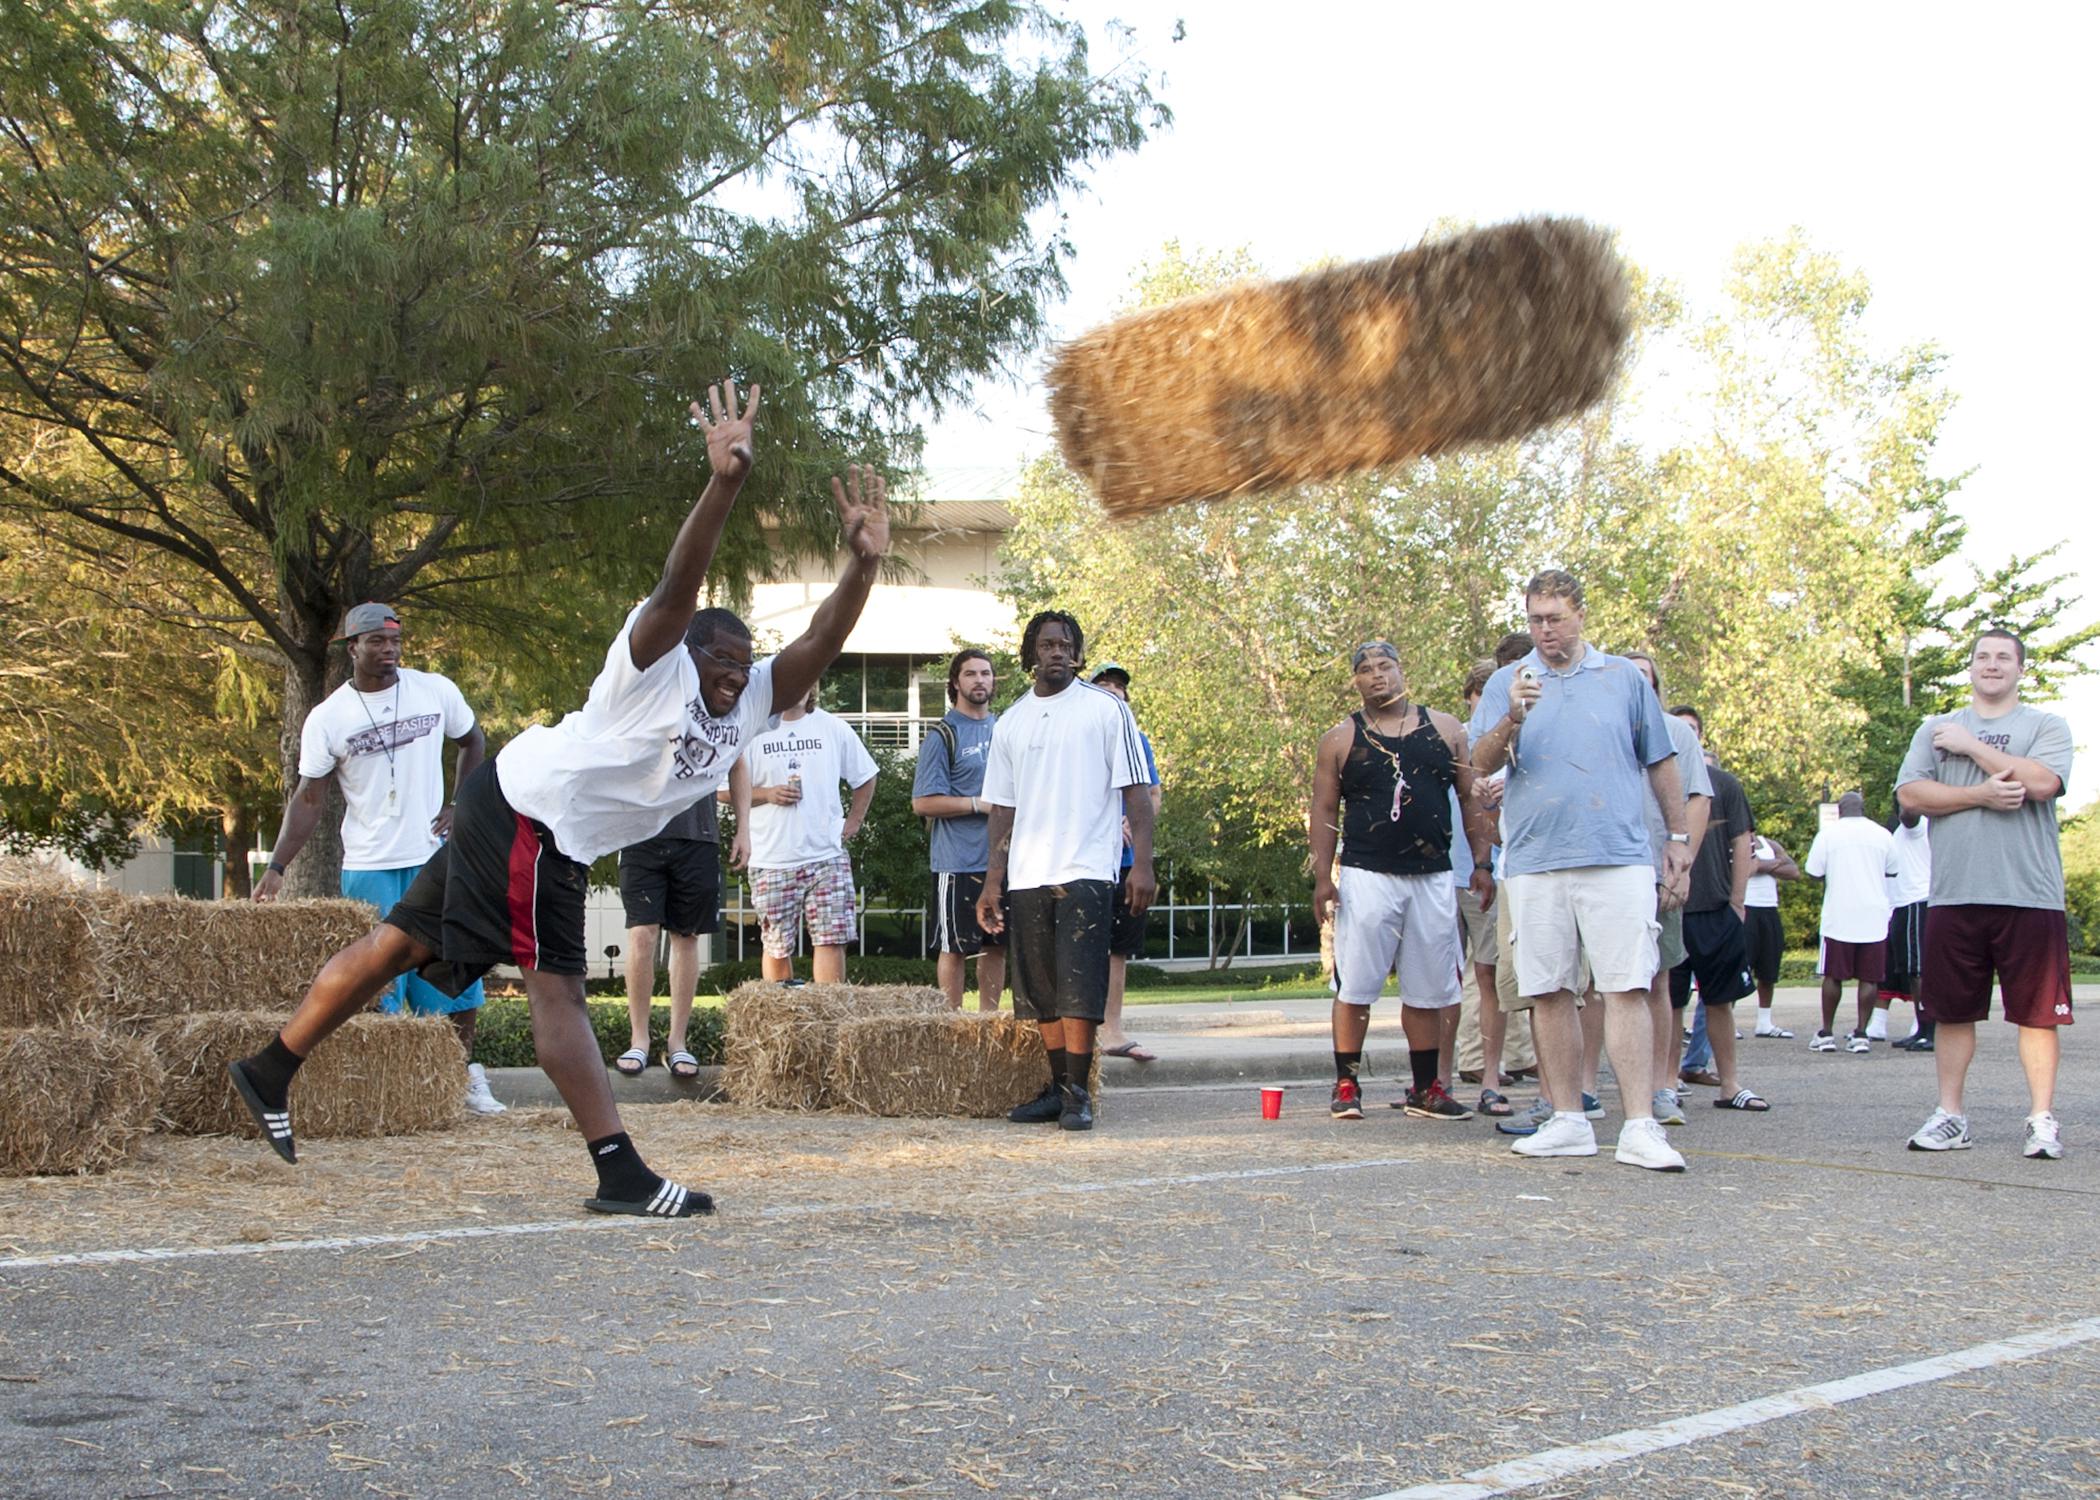 Mississippi State University defensive lineman Kaleb Eulls of Yazoo City defends his title as returning hay toss champion against fellow football players Sunday afternoon, Aug. 19, 2012, on the MSU campus. The second annual Beefin’ up the Bulldogs included a steak supper and activities promoting MSU’s land-grant heritage. Sponsors included First South Farm Credit, Mississippi Cattlemen’s Association, Mississippi Beef Council and MSU’s Animal and Dairy Science Department. (Photo by MSU Ag Communications/Kat 